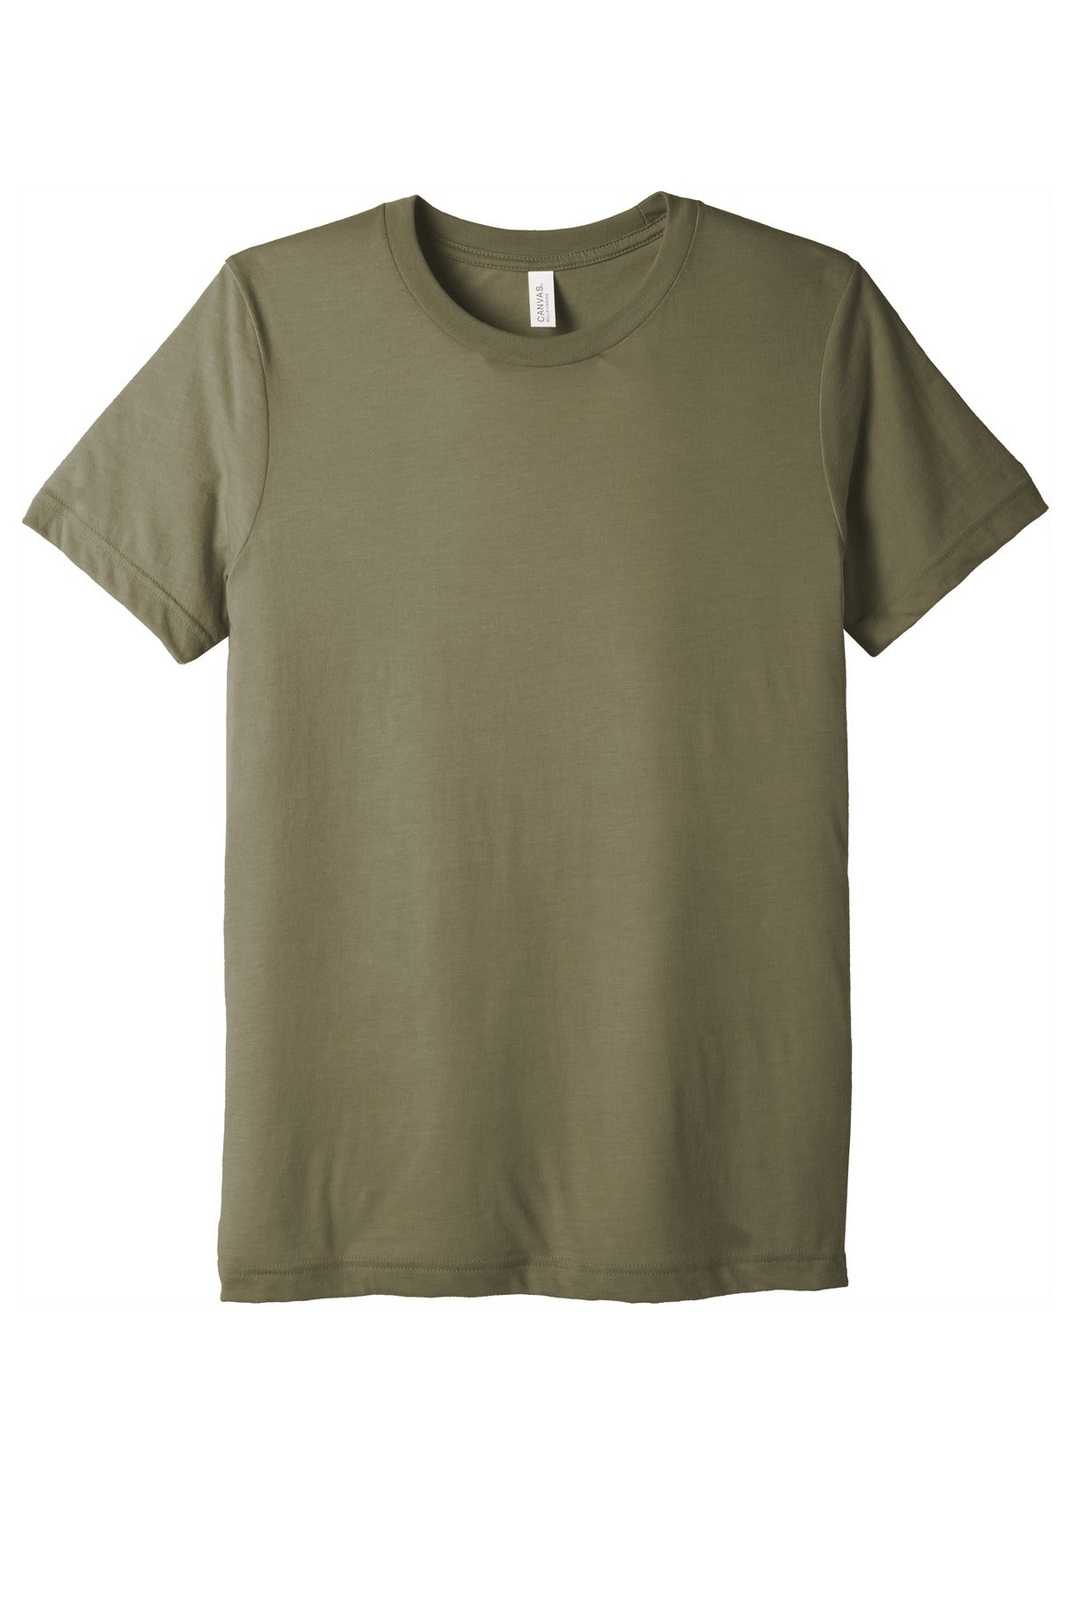 Bella + Canvas 3413 Unisex Triblend Short Sleeve Tee - Olive Triblend - HIT a Double